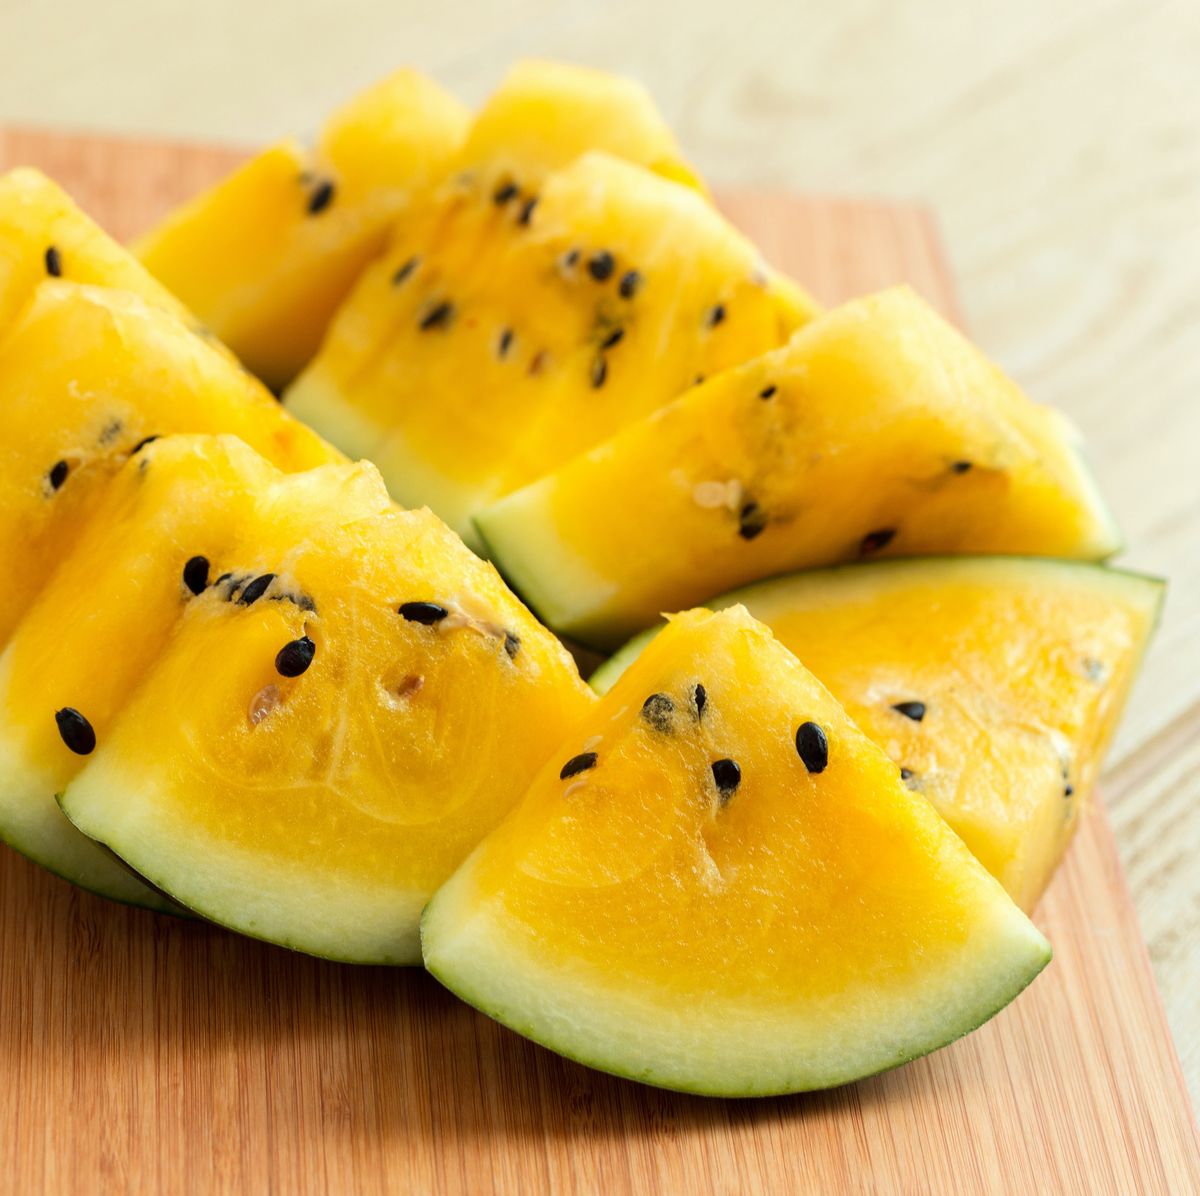 Can Dogs Safely Enjoy the Juicy Sweetness of Yellow Watermelon?